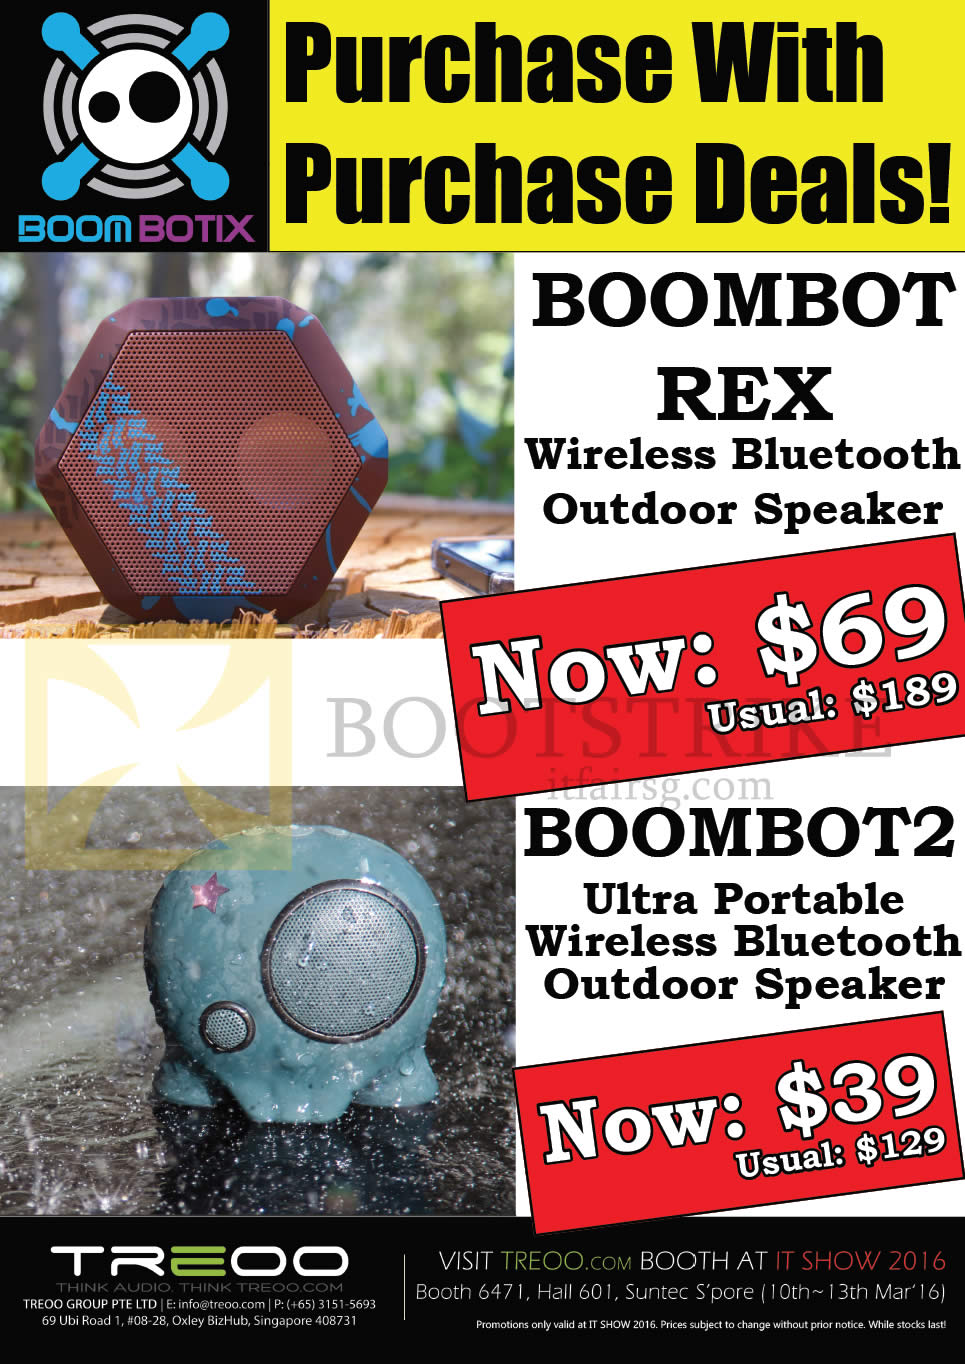 IT SHOW 2016 price list image brochure of Treoo PwP Speakers Boombot Rex, 2